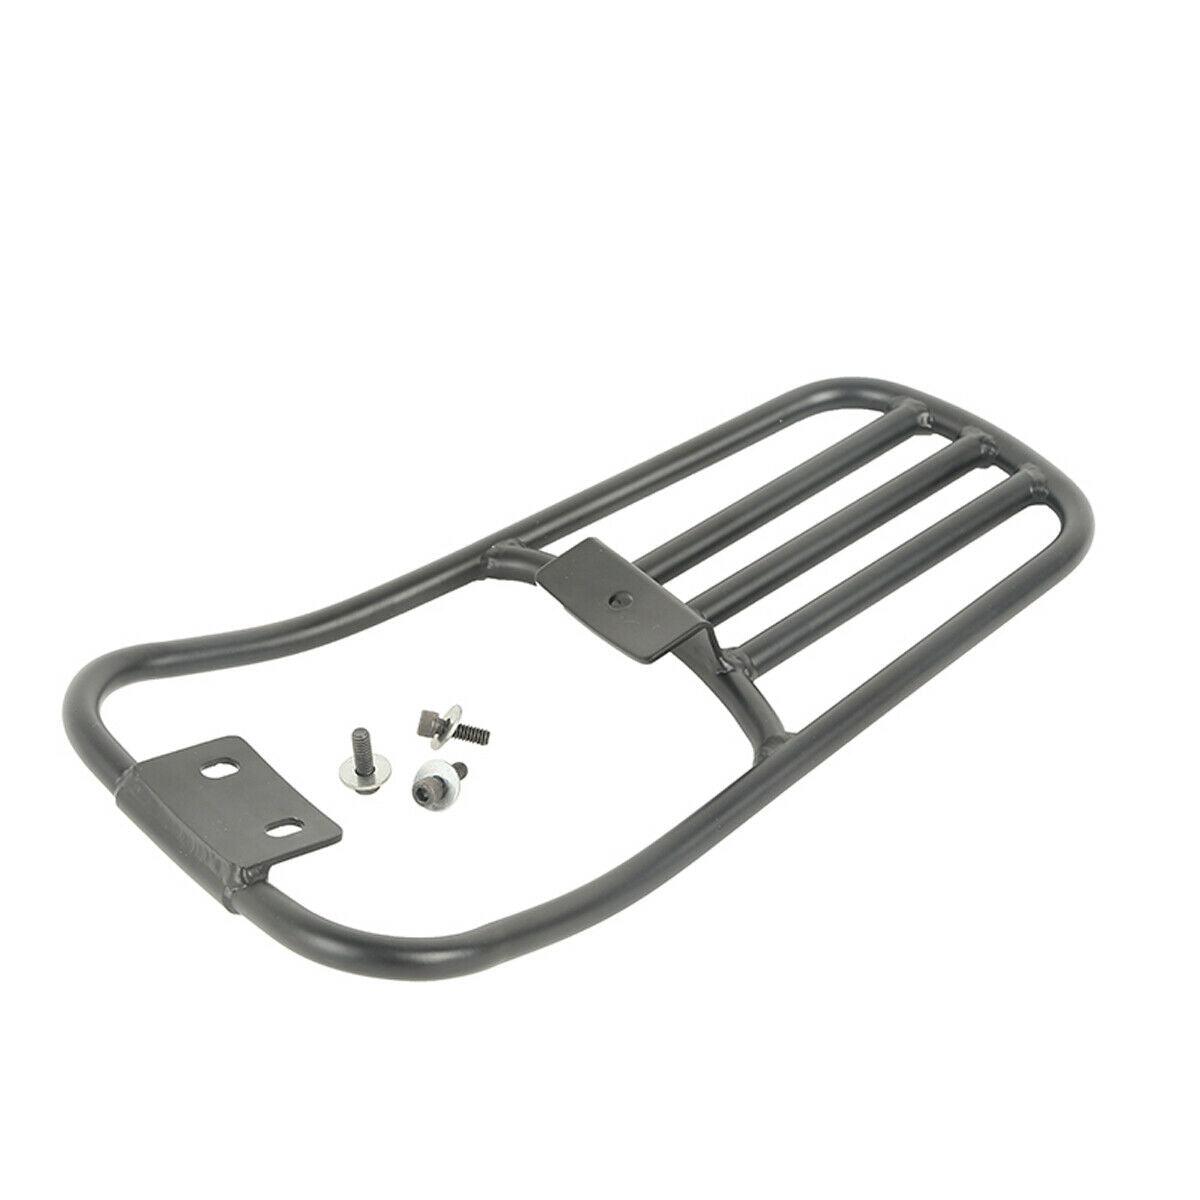 Rear Fender Luggage Rack Fit For Harley Softail Deluxe 06-18 Fatboy 07-17 Black - Moto Life Products